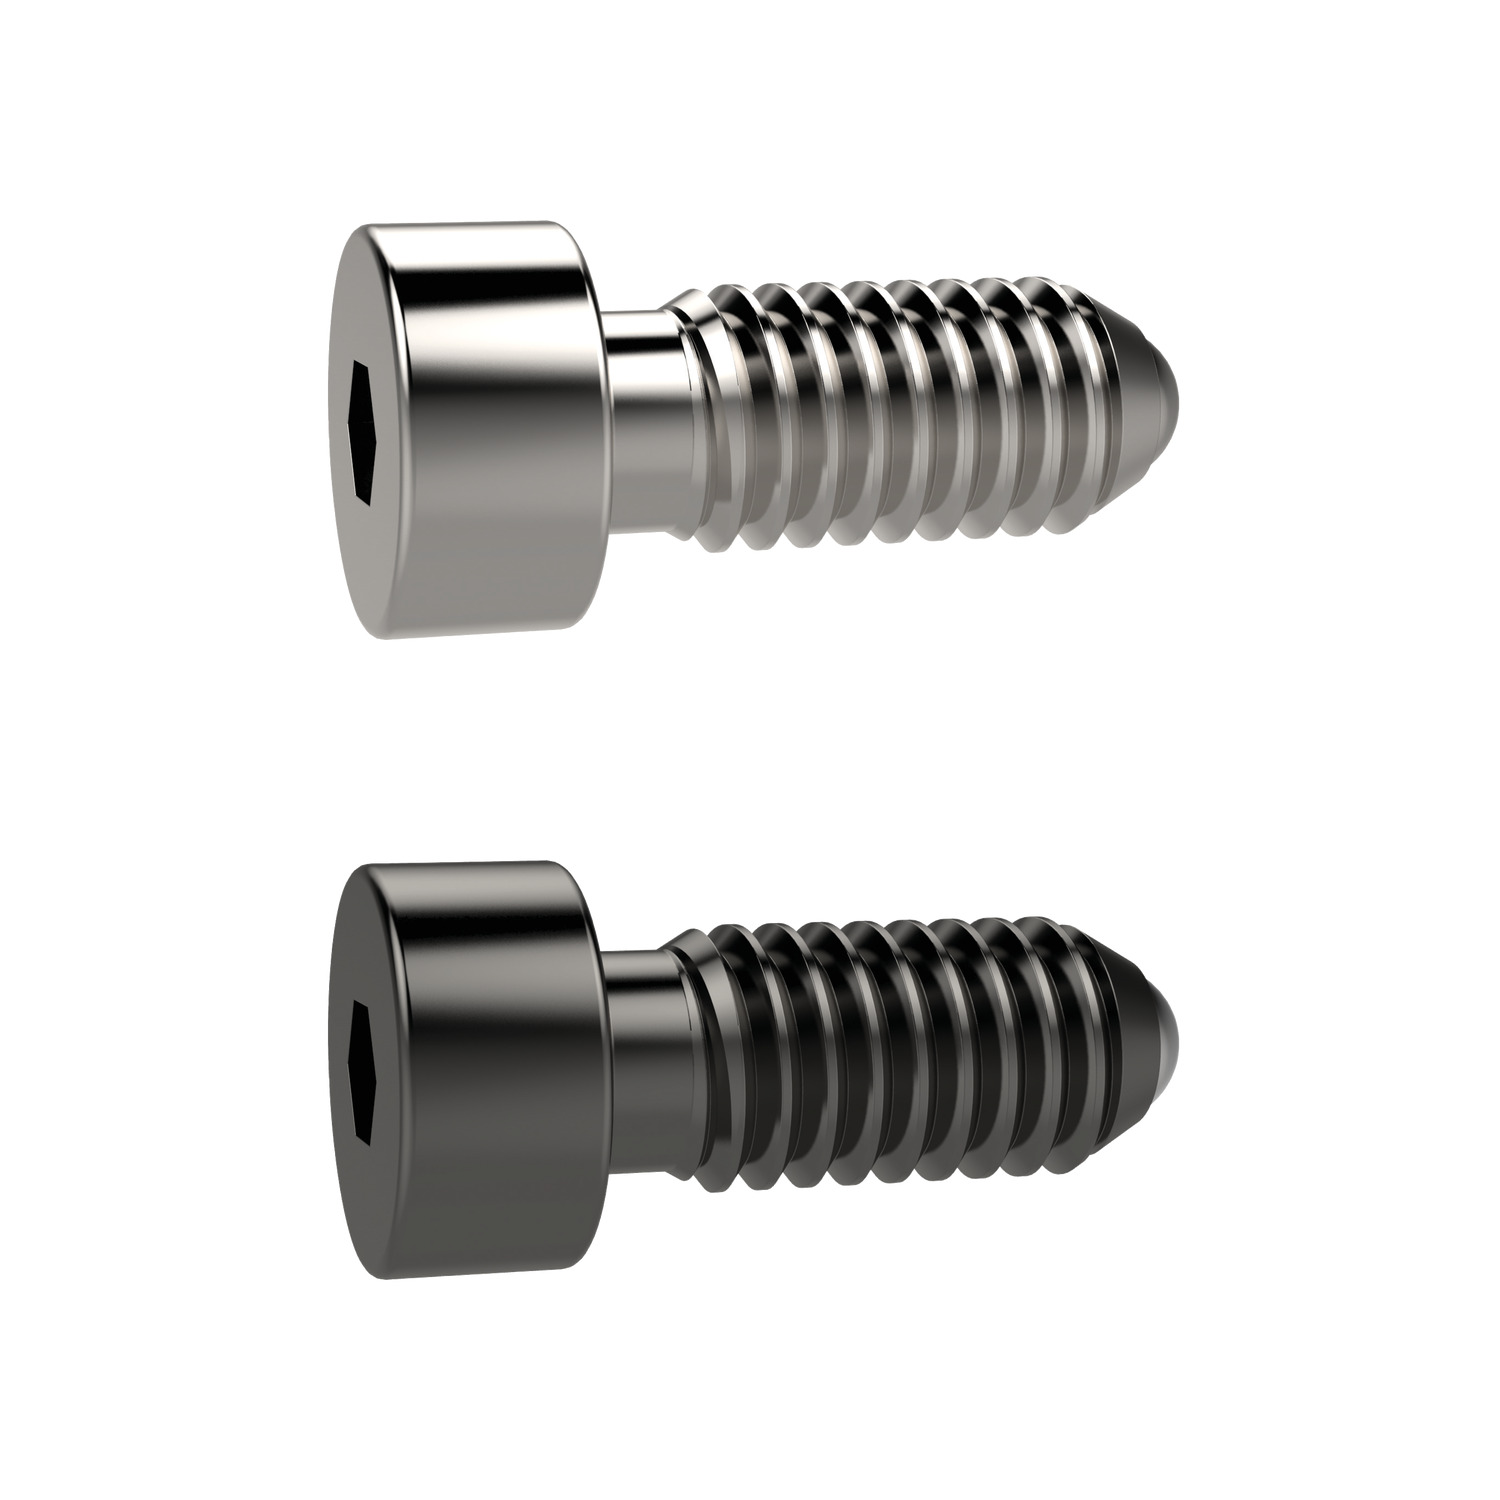 Spring Plungers A hex. socket version of the headed spring plunger 31400 available in both steel and stainless. Specials available on request.